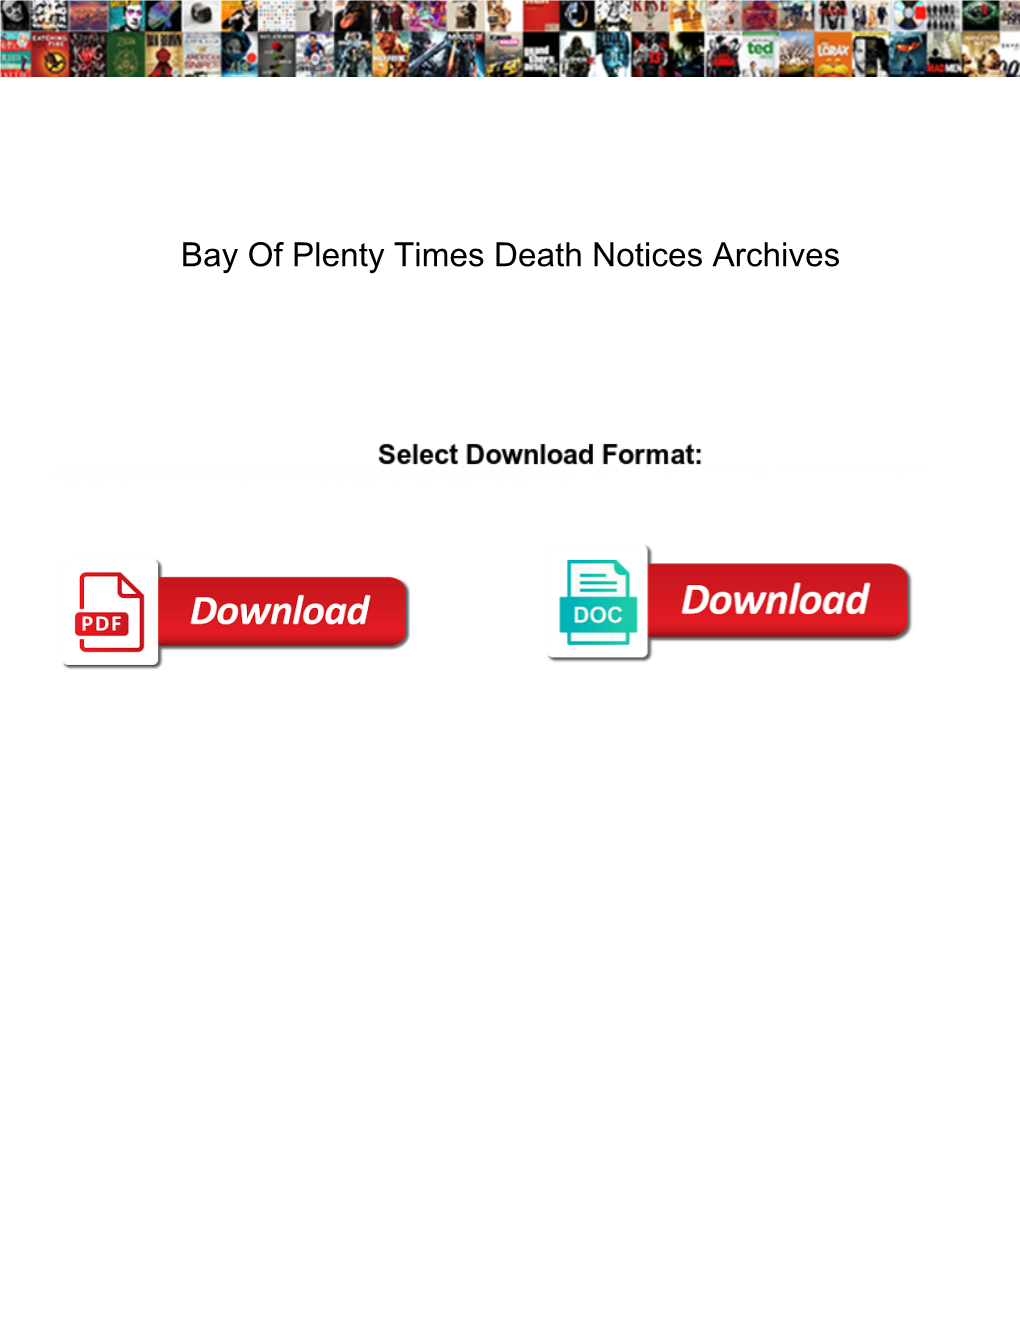 Bay of Plenty Times Death Notices Archives